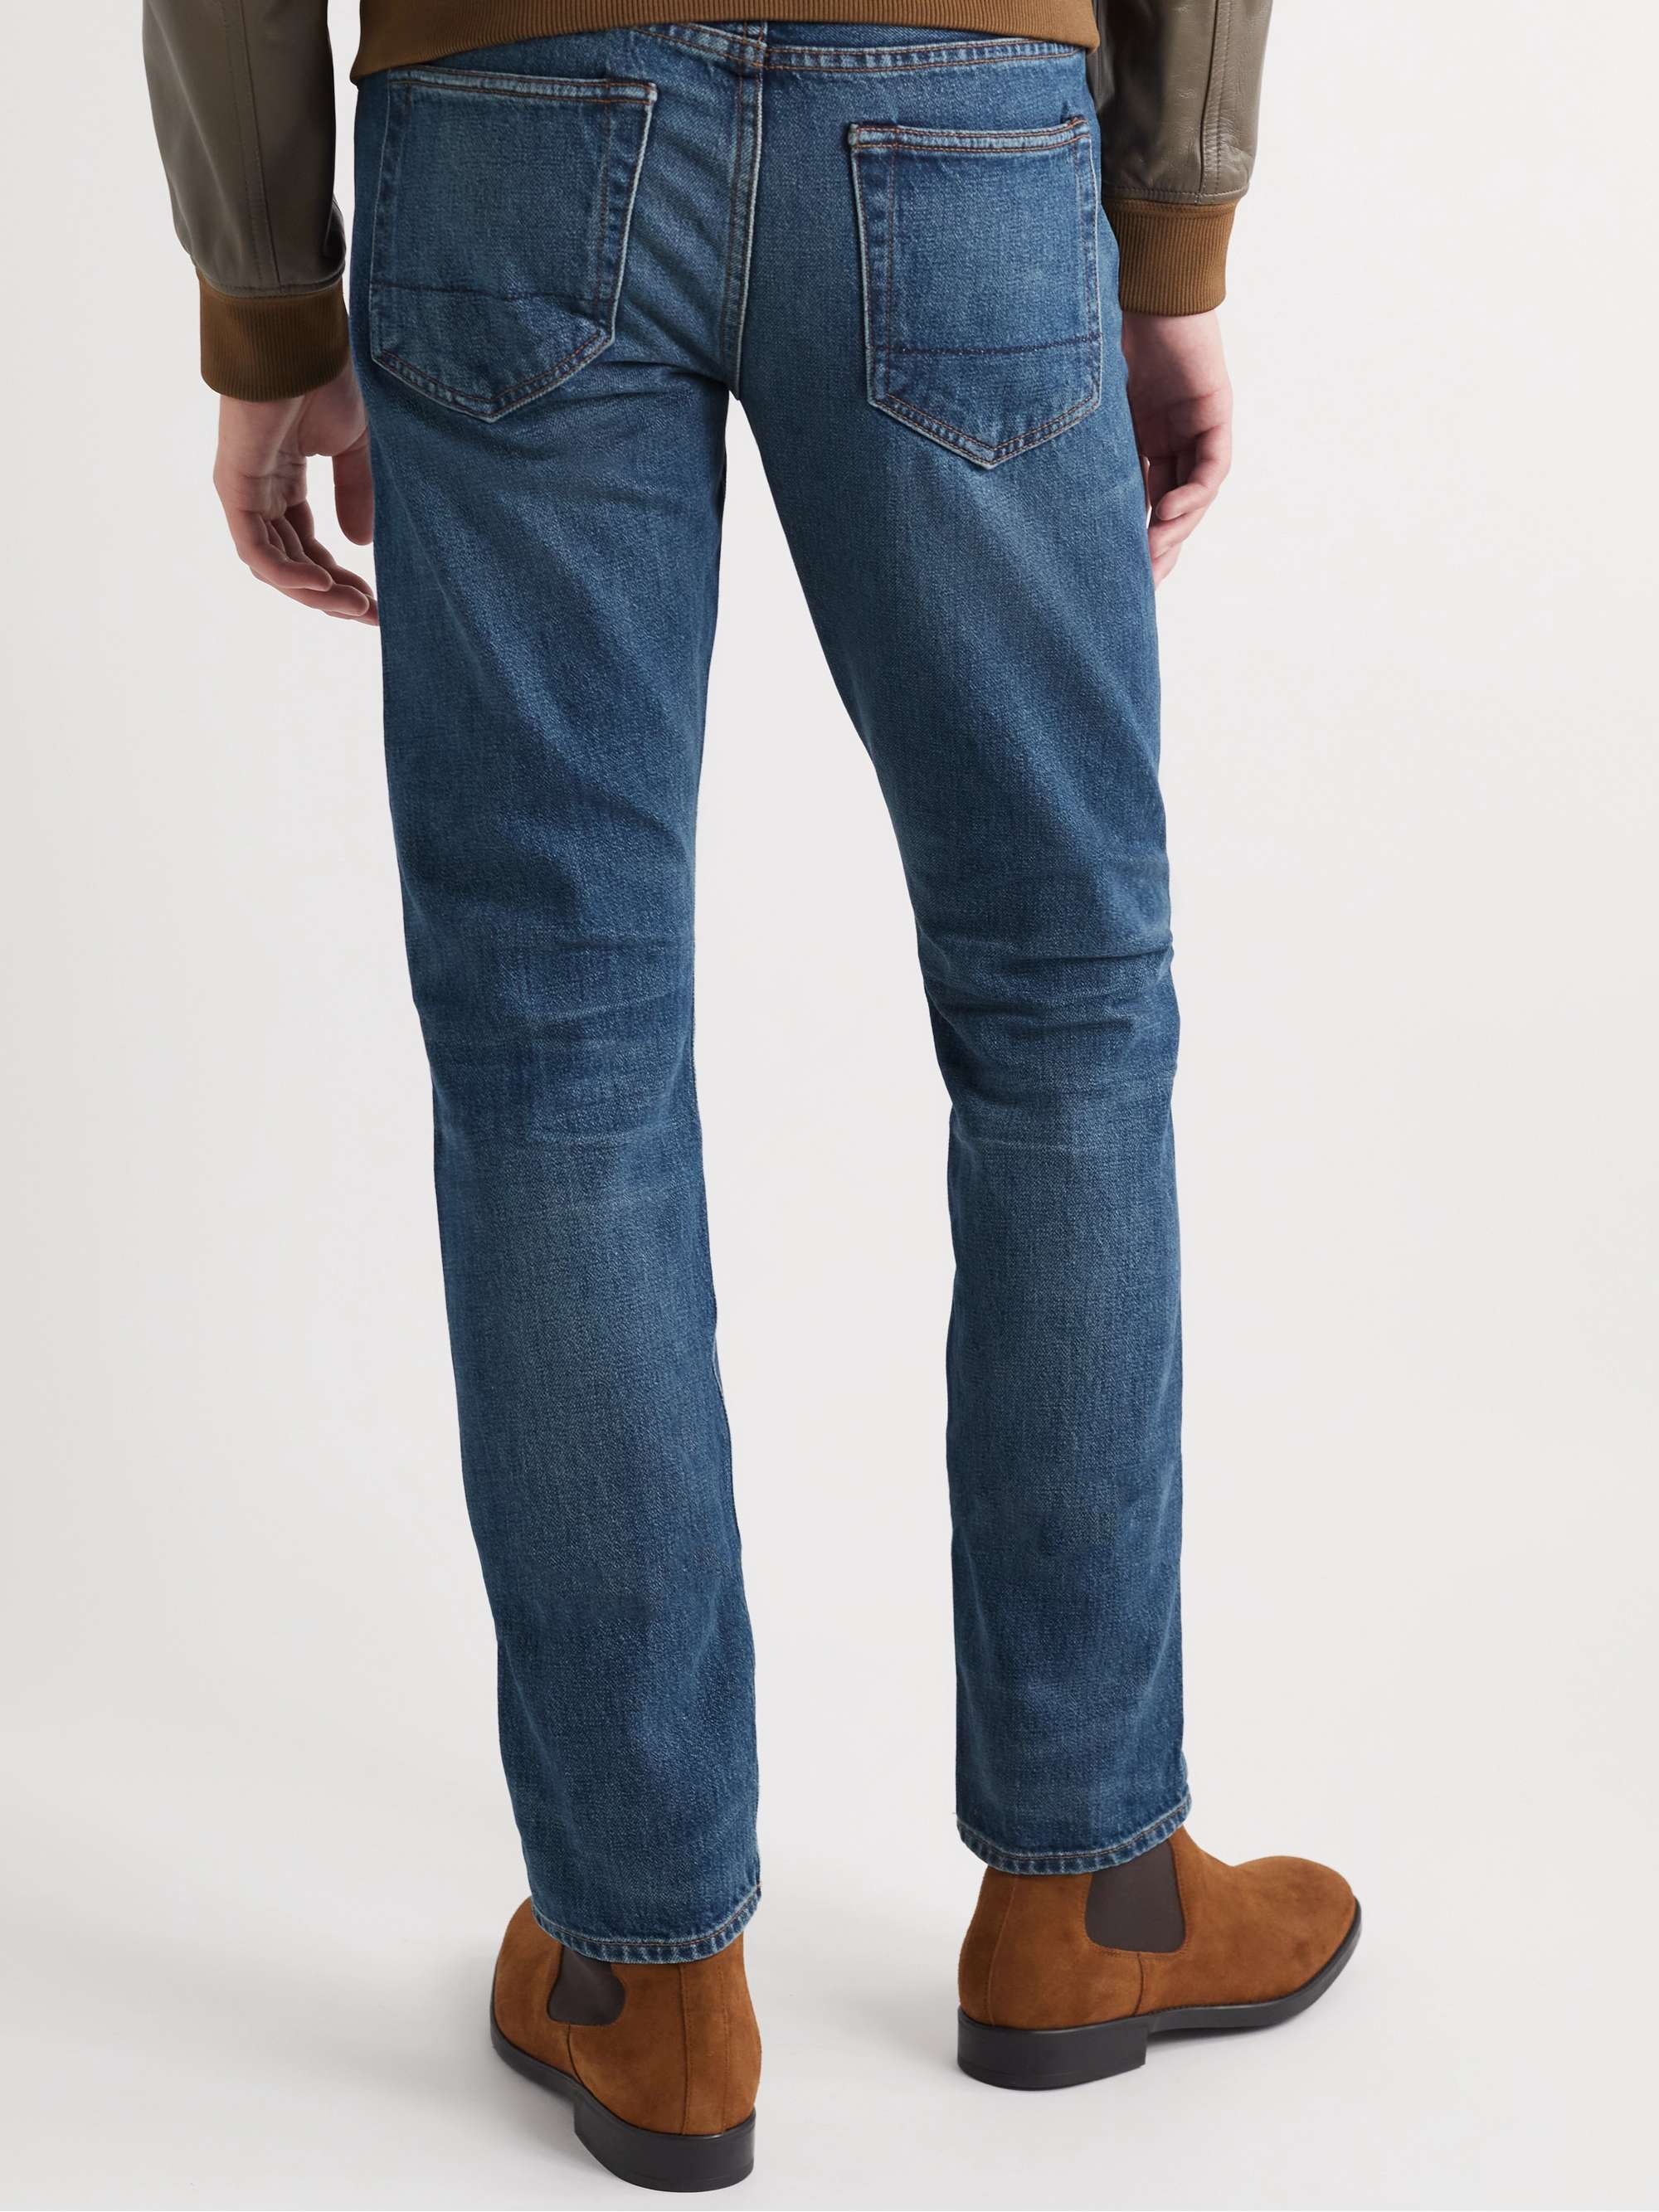 TOM FORD Straight-Leg Garment-Washed Selvedge Jeans